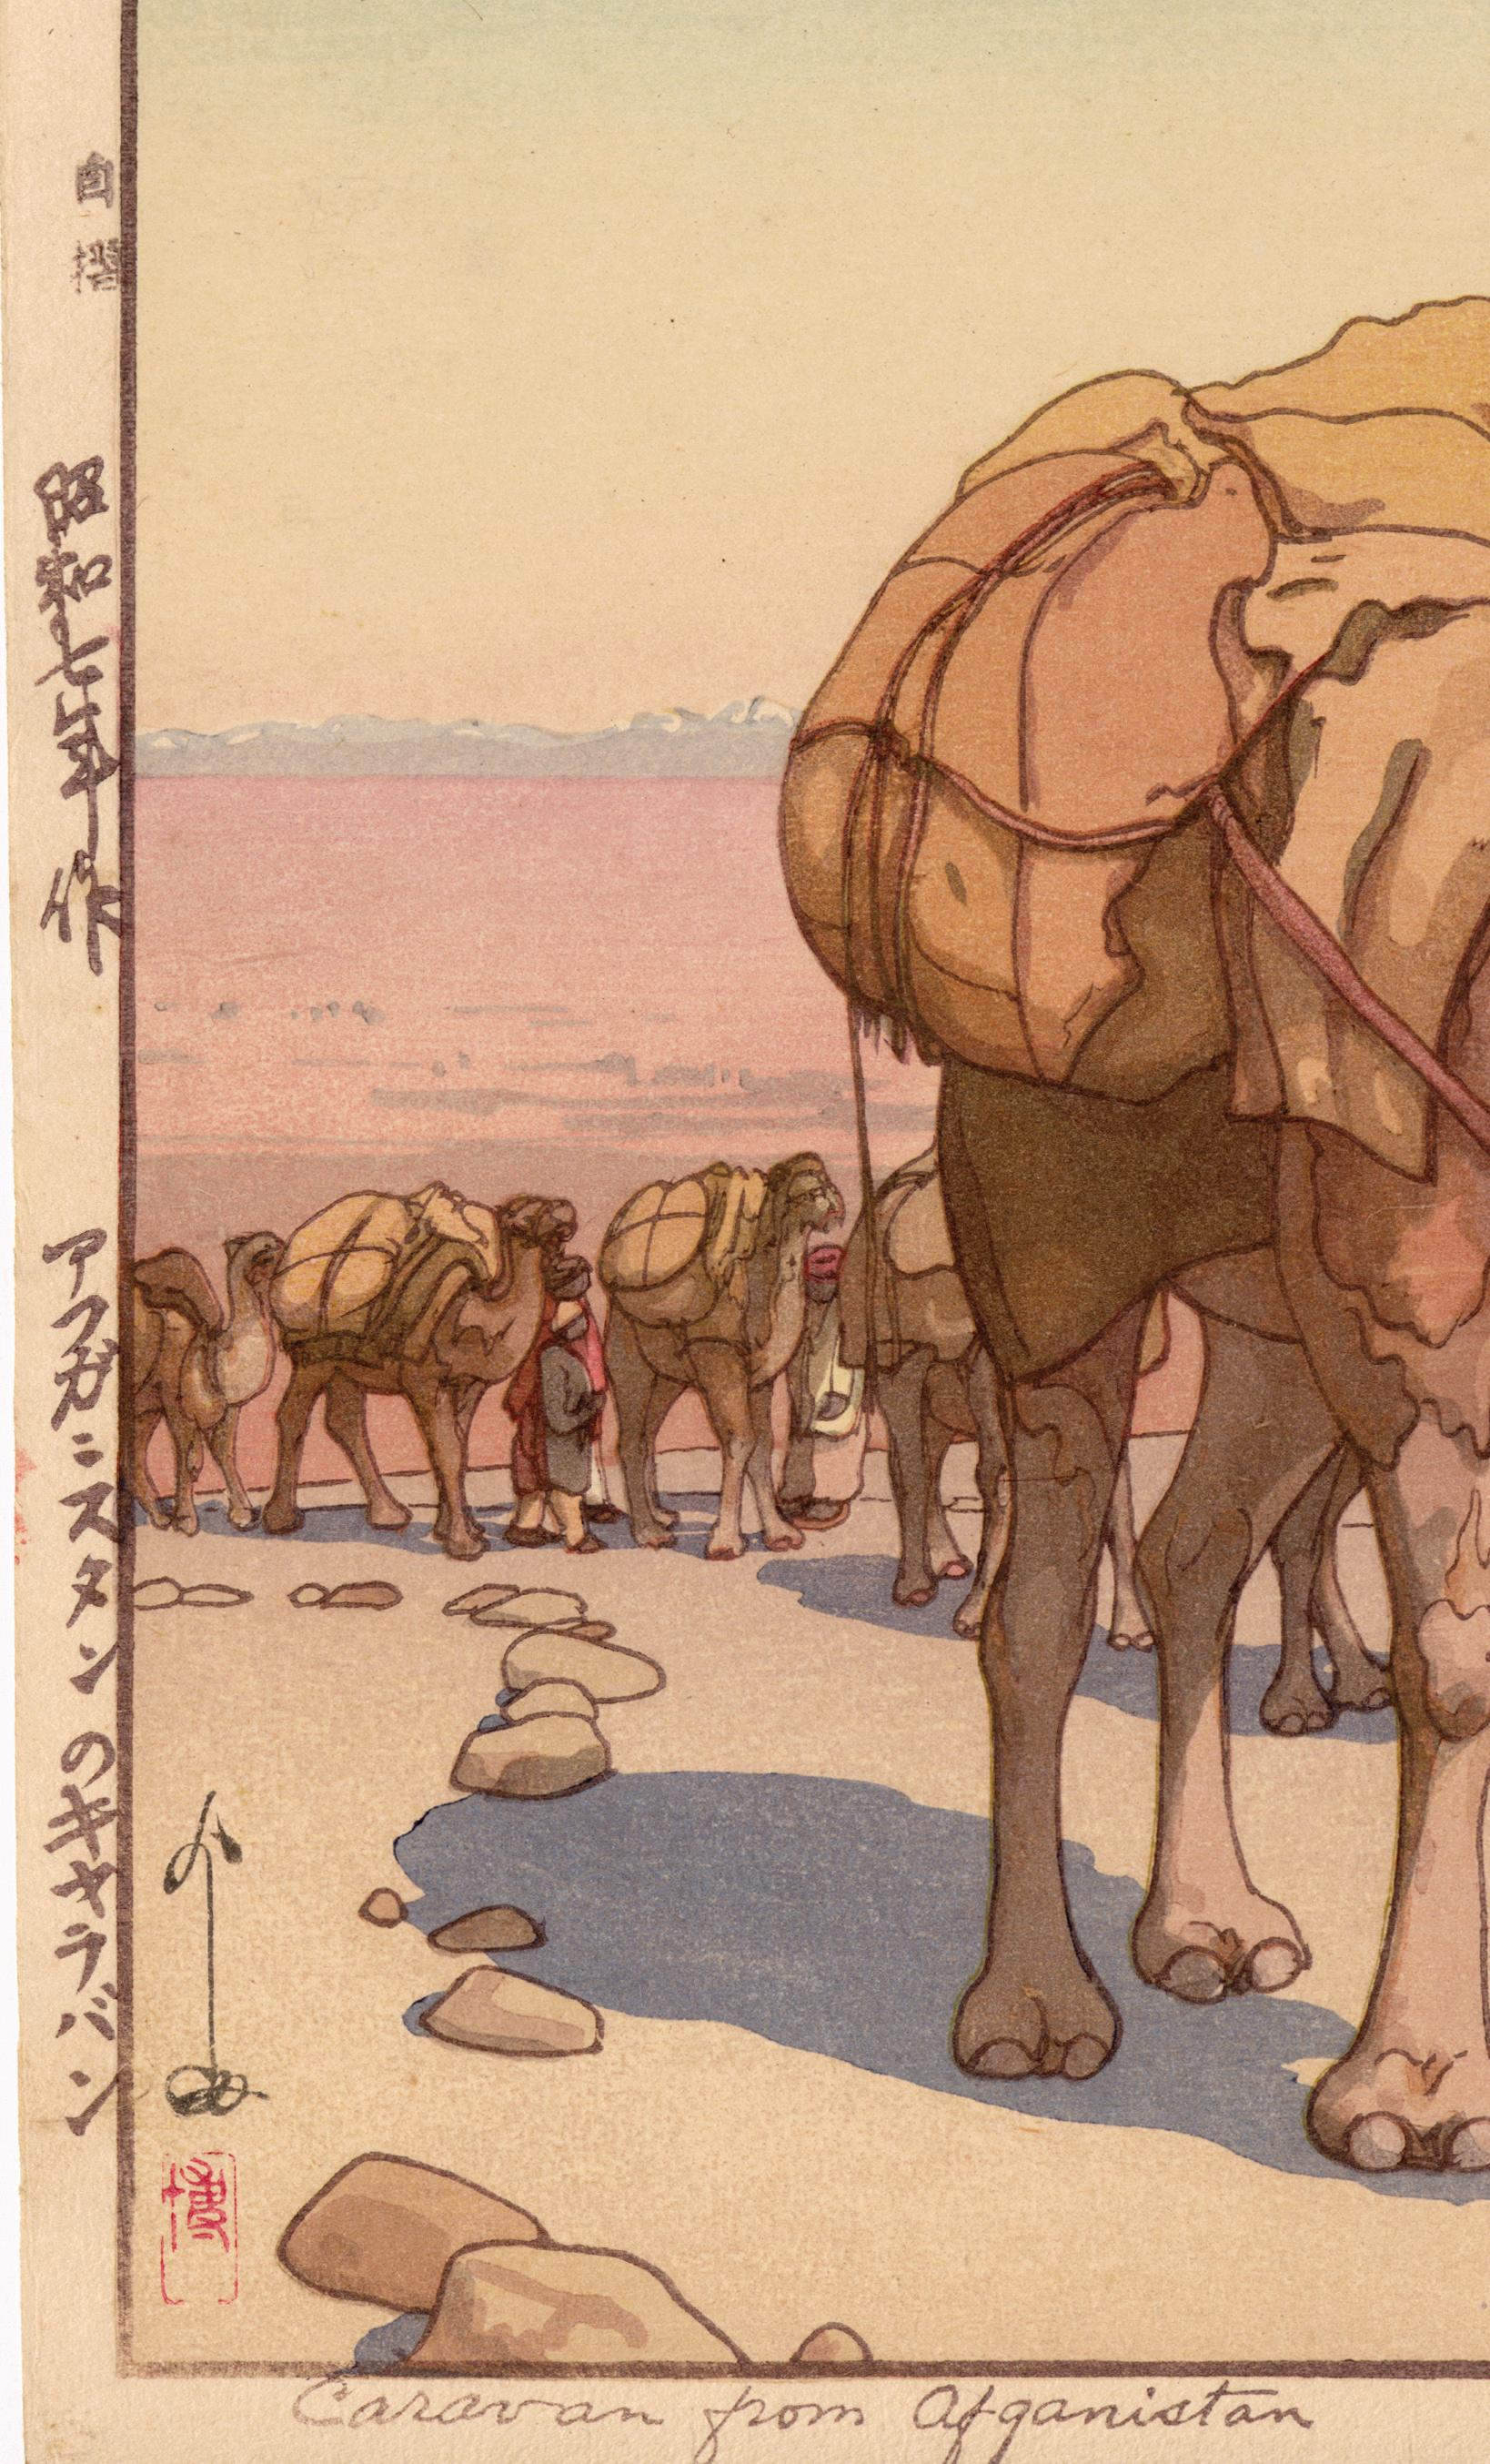 Original handmade Japanese woodblock print. “Afuganisutan no kyaraban”. Daytime view of a camel caravan, with one small donkey besides. This work has at least three different blocks than the nighttime version, as we can see landscape in the distance